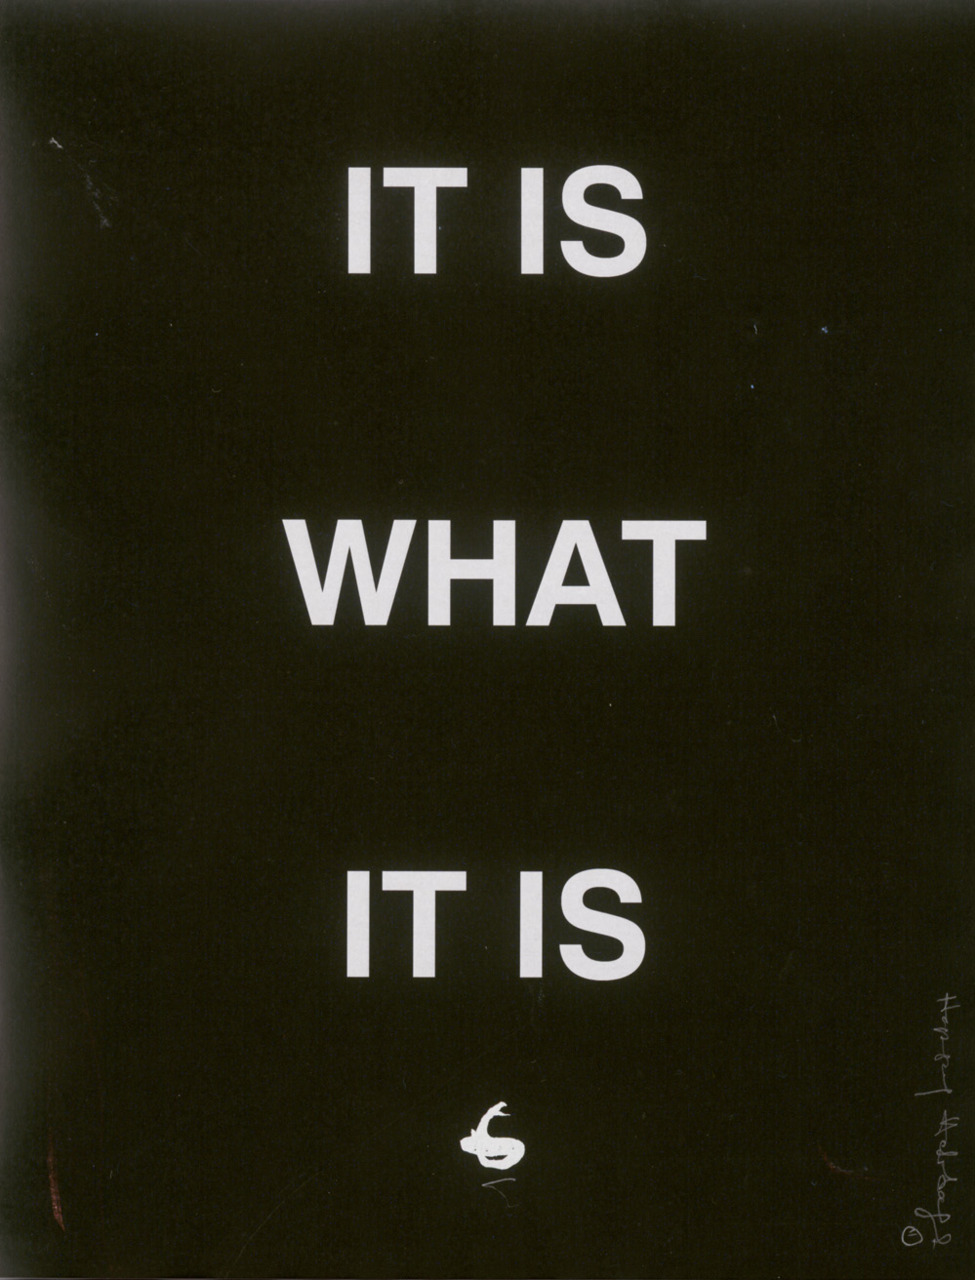 It Is What It Is Wallpapers